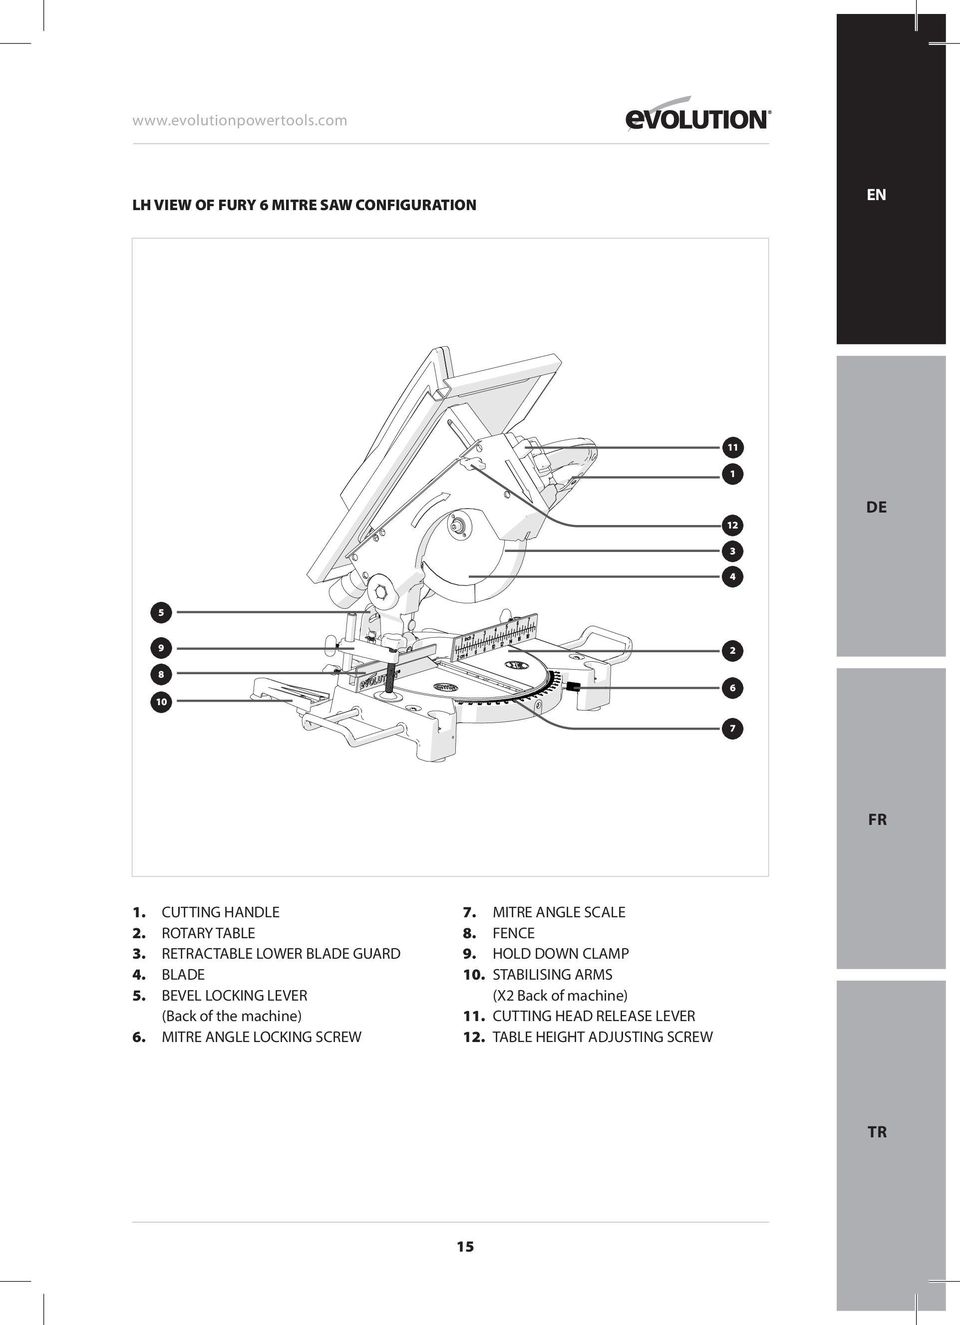 BEVEL LOCKING LEVER (Back of the machine) 6. MITRE ANGLE LOCKING SCREW 7. MITRE ANGLE SCALE 8.